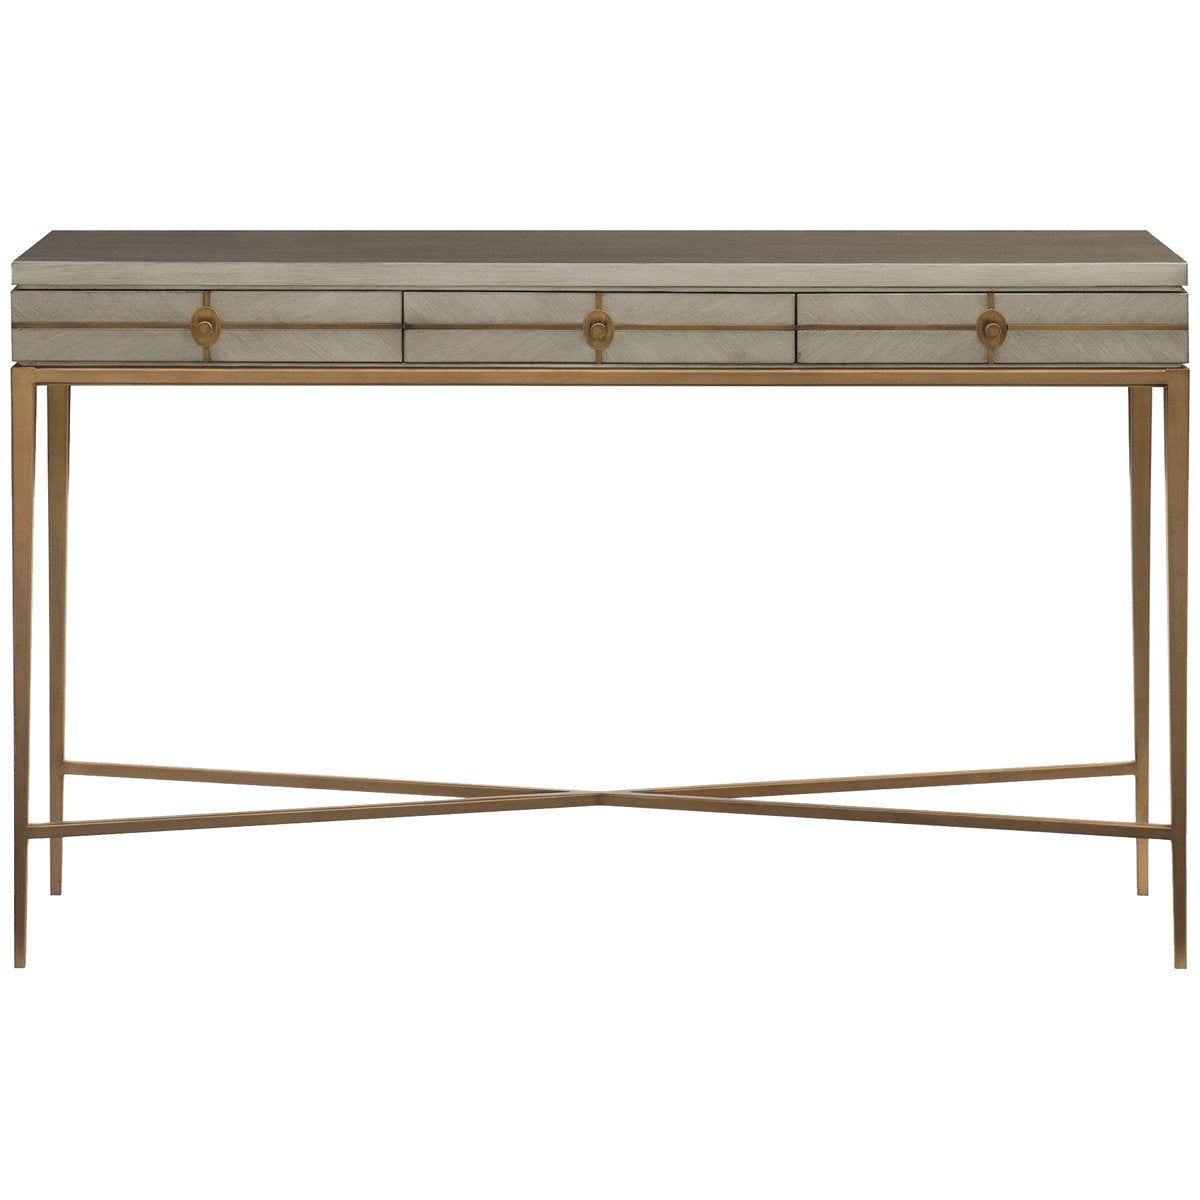 Ambella Home Longwood Console Table